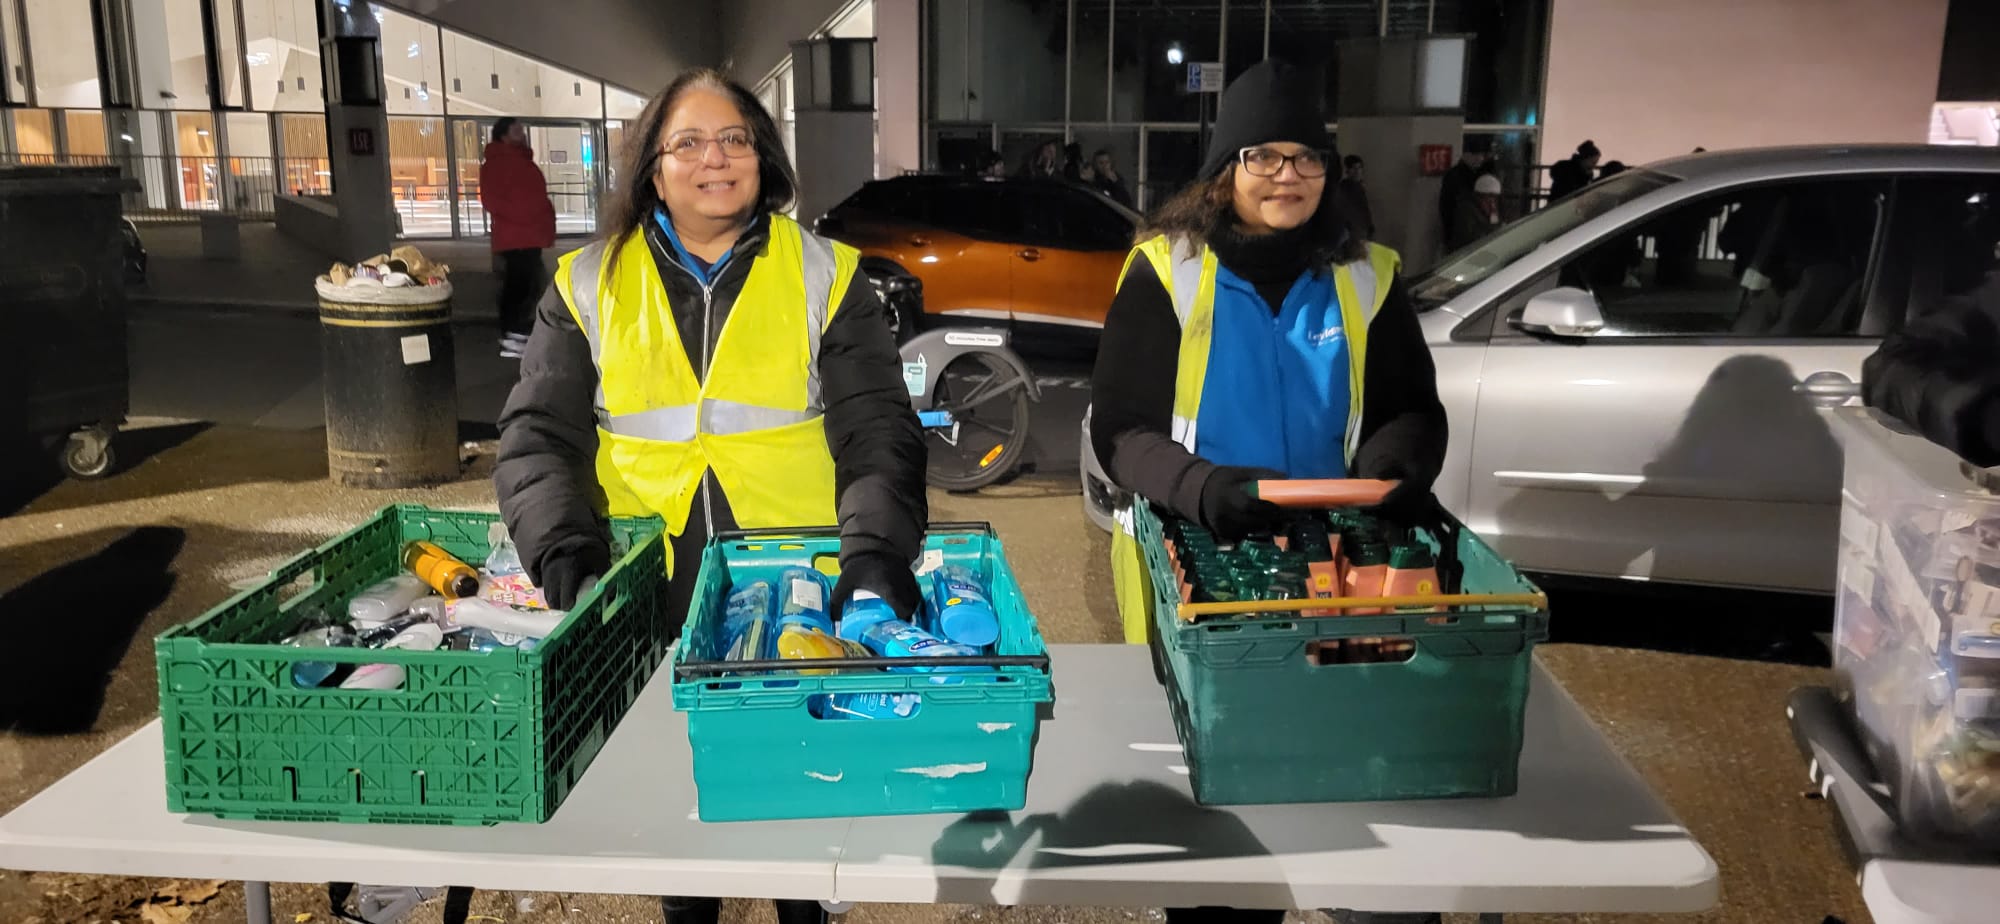 Leyland SDM offers support to London’s homeless